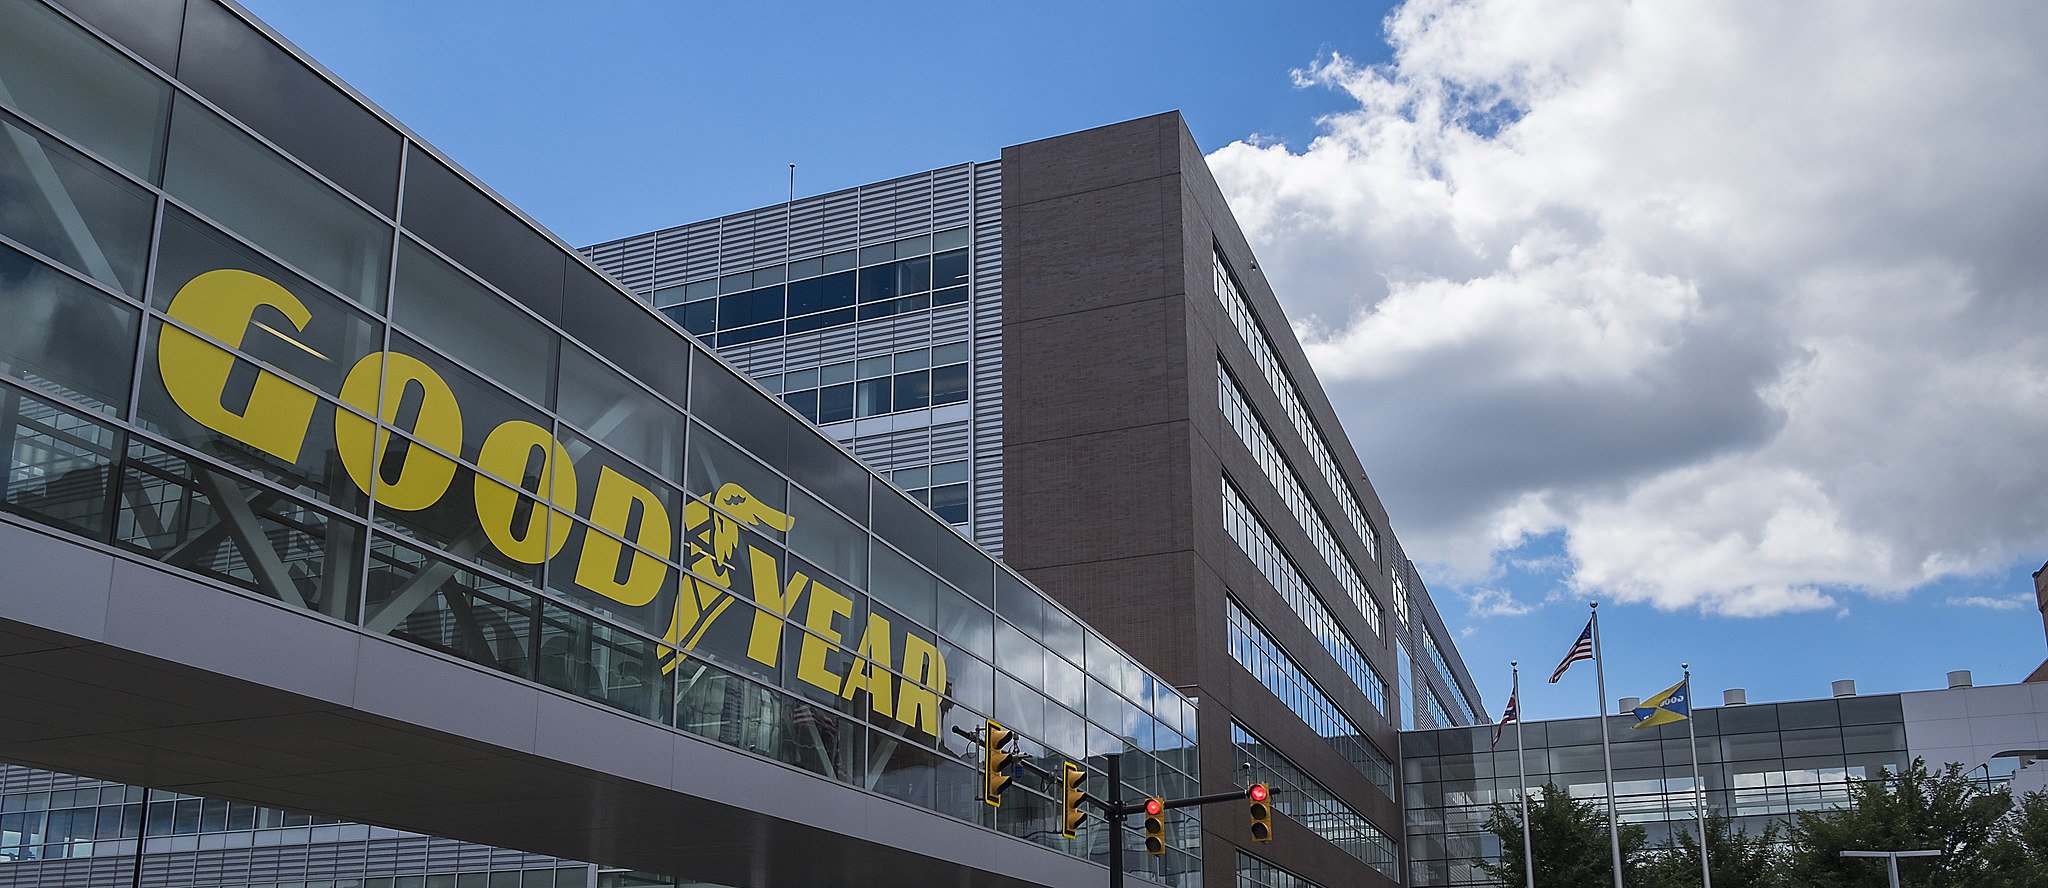 A photo of the exterior of Goodyear's headquarters